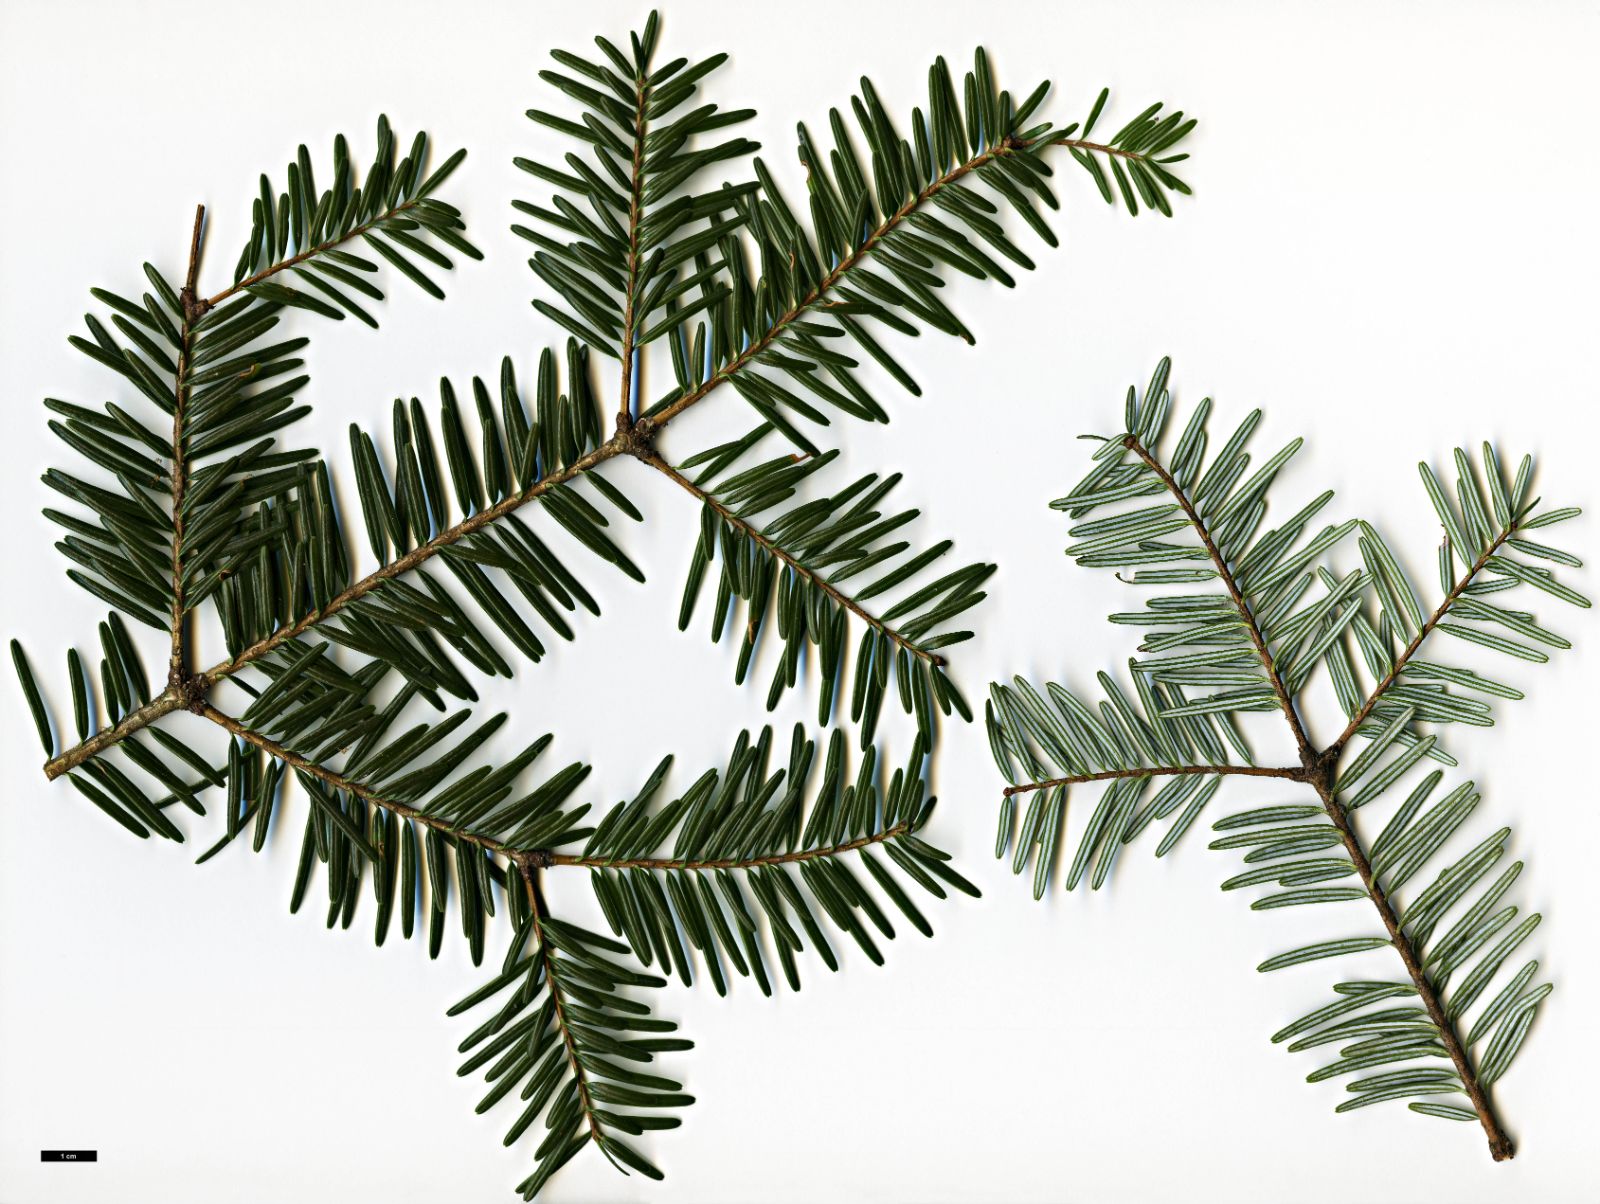 Abies fabri - Trees and Shrubs Online